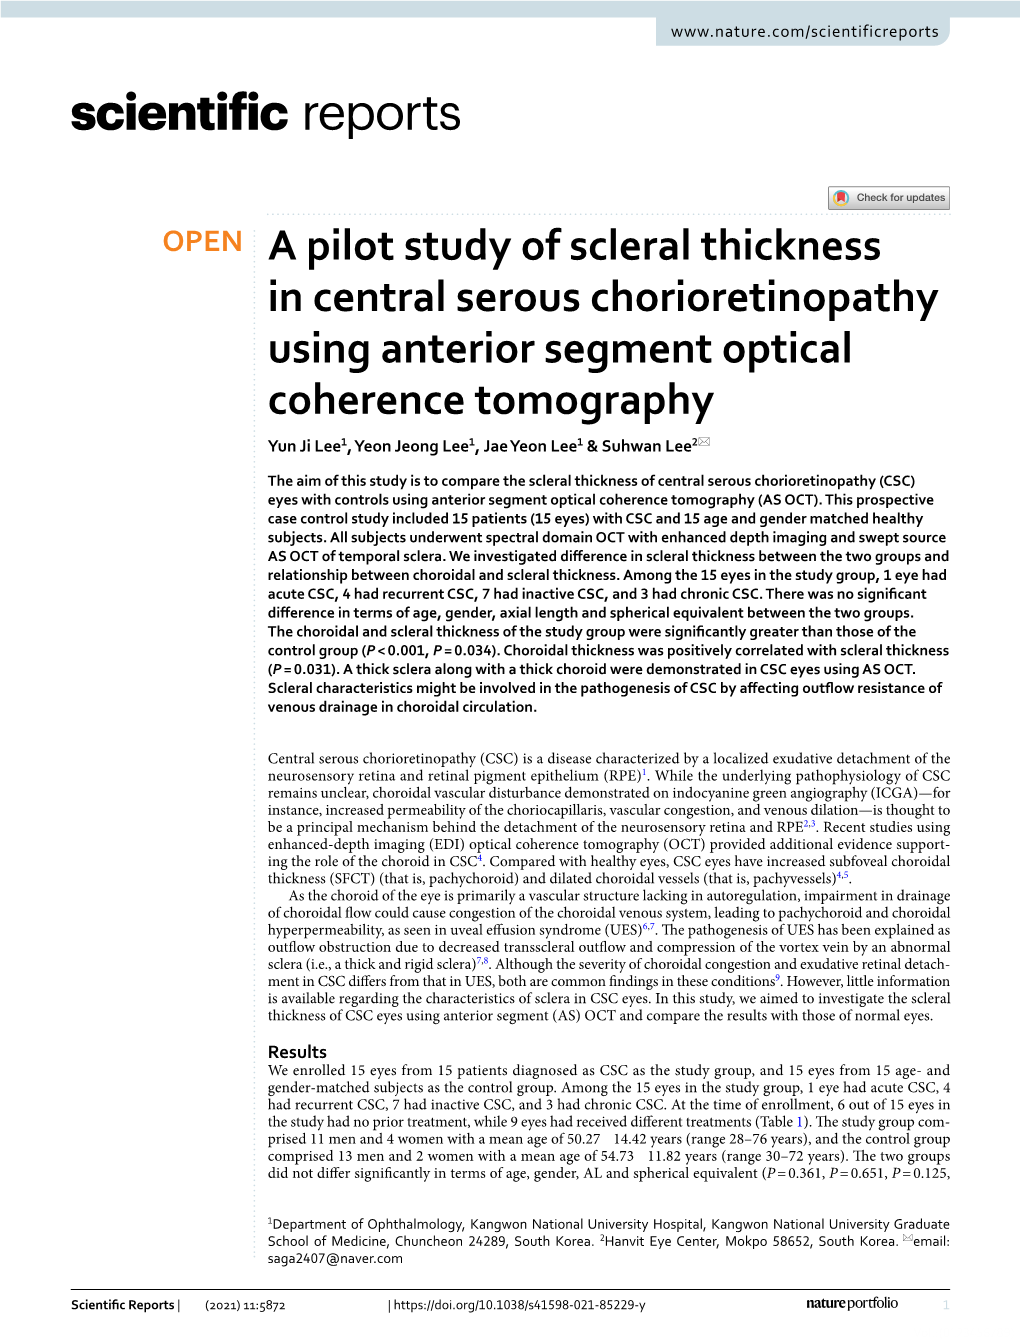 A Pilot Study of Scleral Thickness in Central Serous Chorioretinopathy